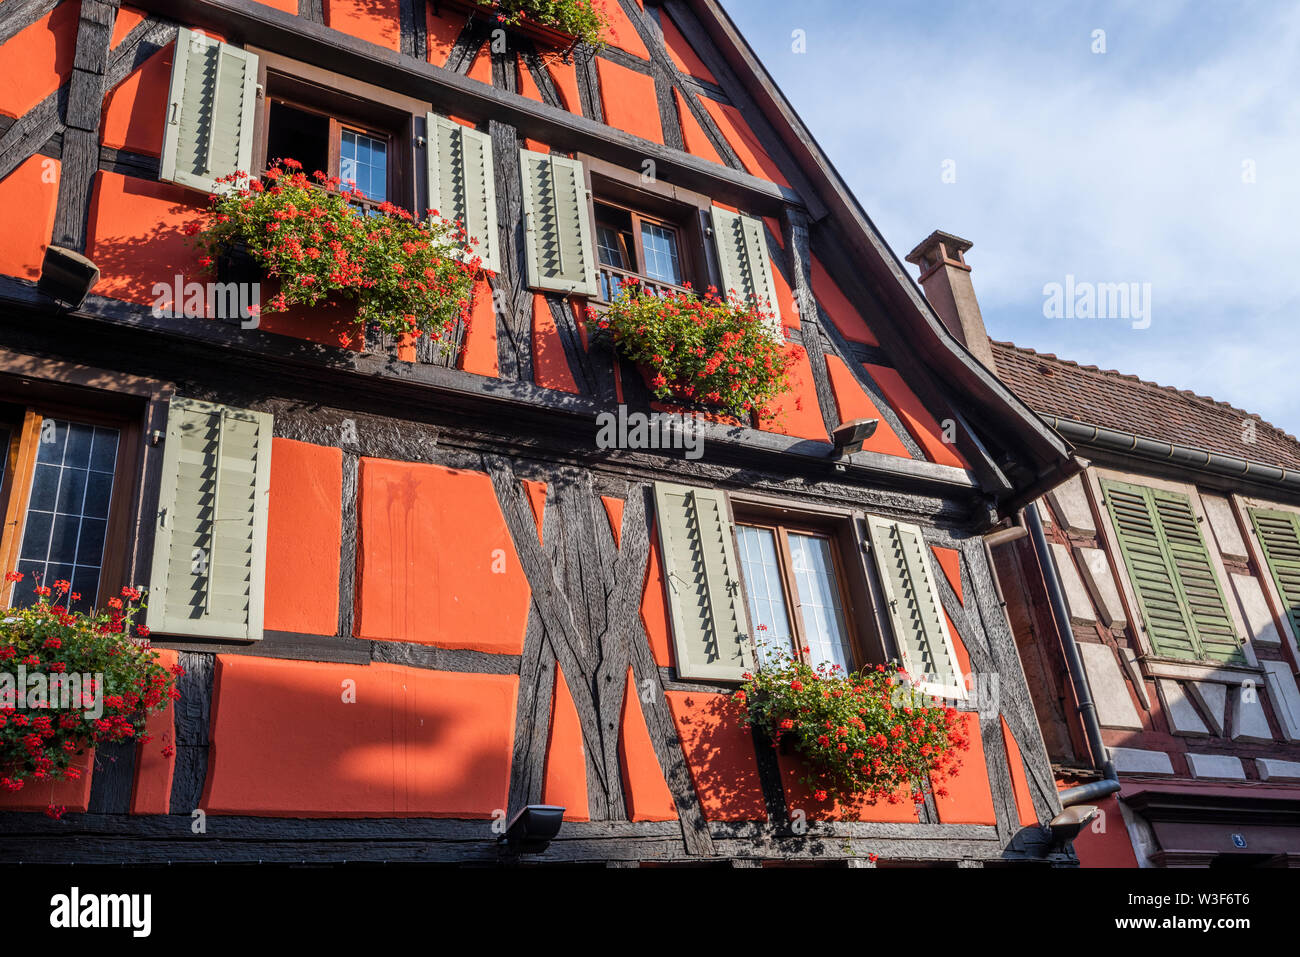 colorful half-timbered house of Ribeauvillé, Alsace Wine Route, France, red house with flower decoration Stock Photo